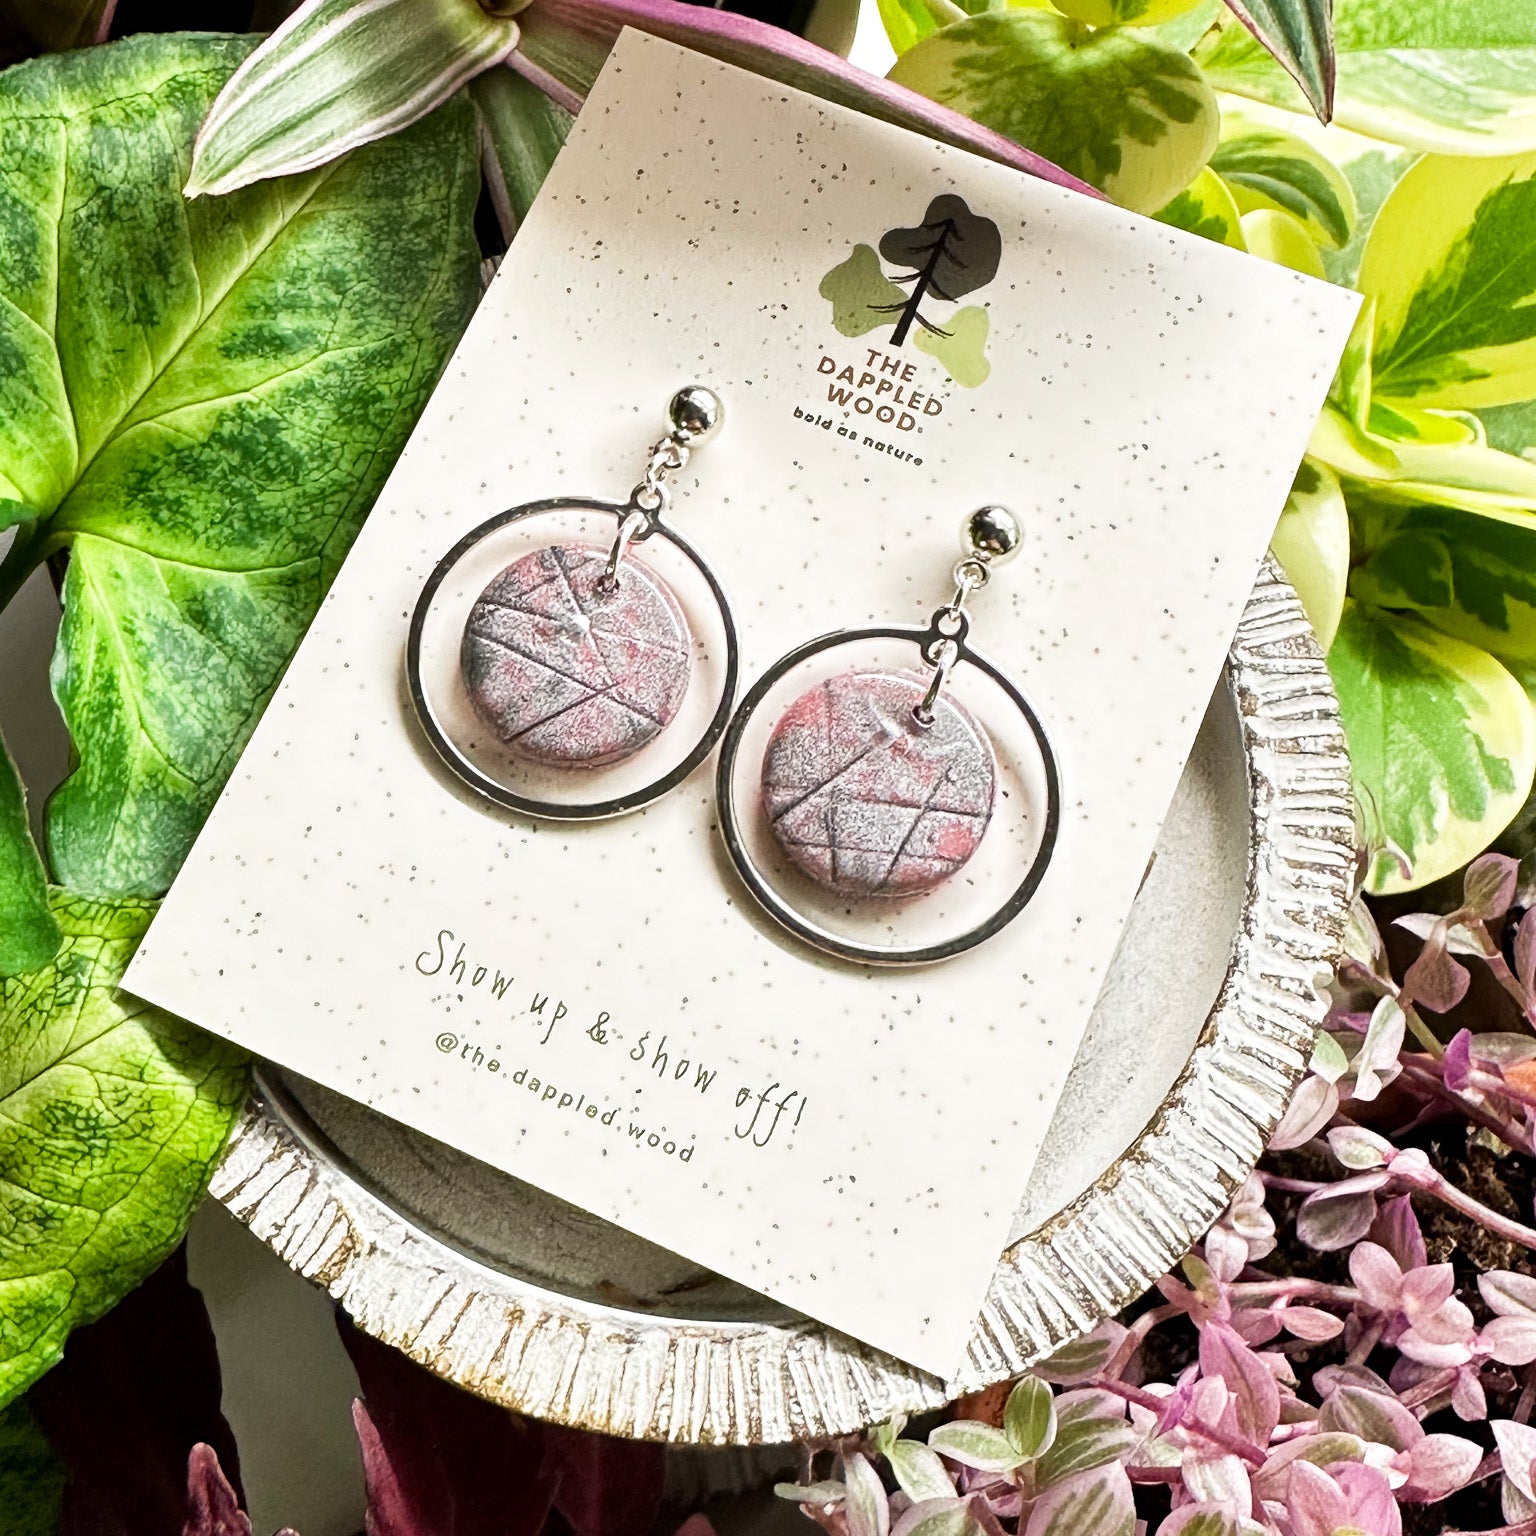 Handcrafted 'Michele' polymer clay earrings featuring shimmering pink circular pendants with silver hoops, displayed on a speckled white card with nature-inspired 'The Dappled Wood' branding, complemented by a lush backdrop of green and pink foliage.